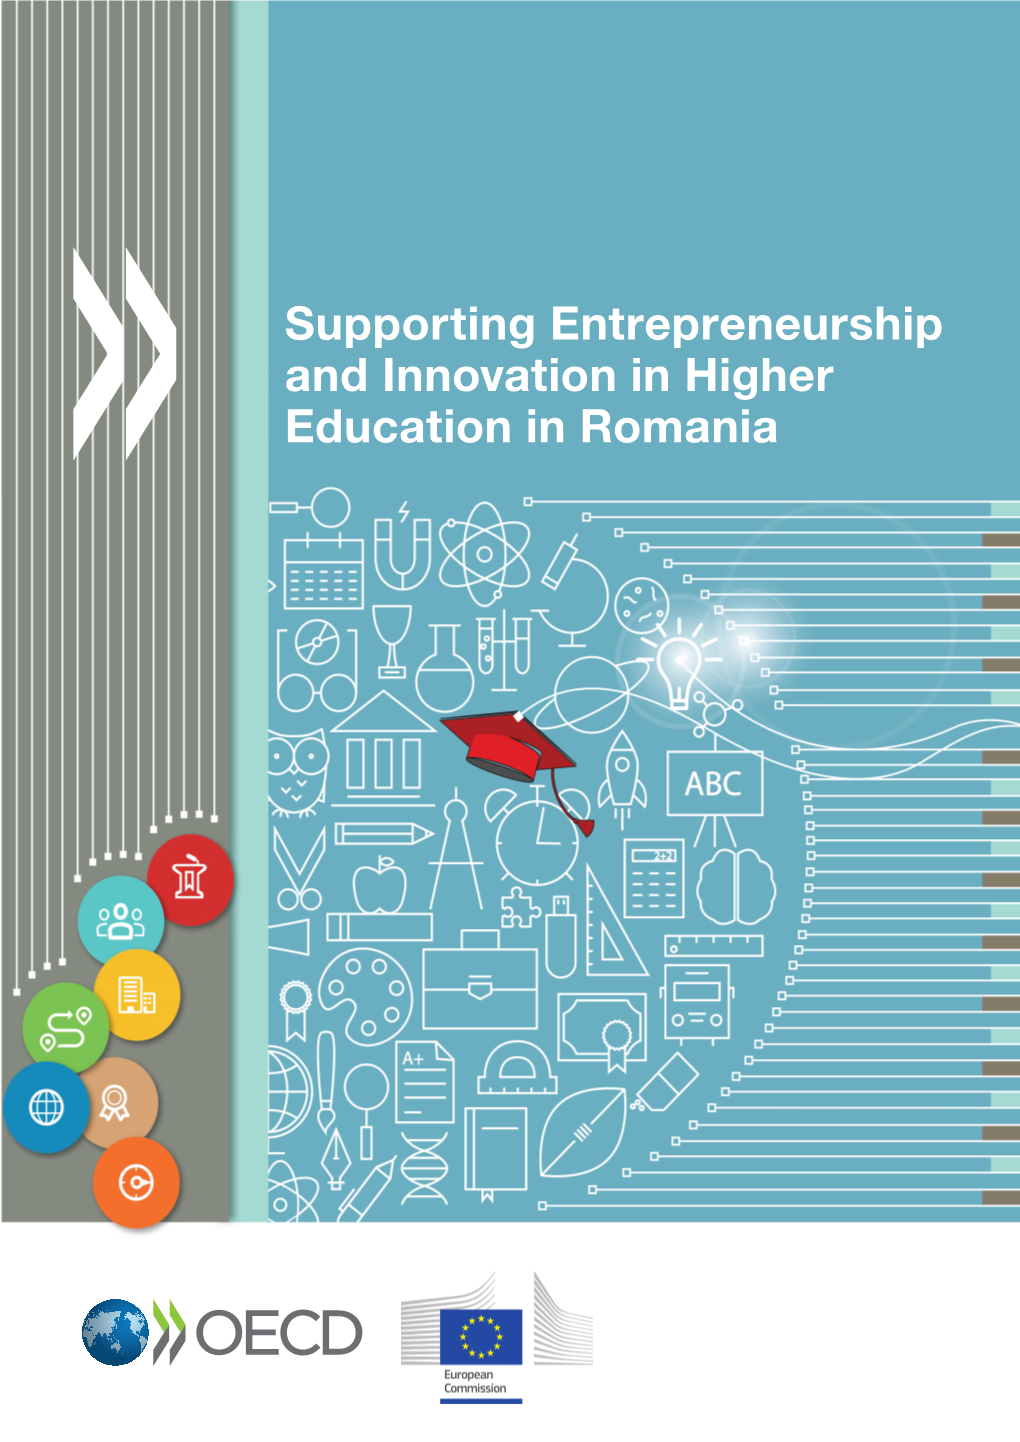 Supporting Entrepreneurship and Innovation in Higher Education in Romania